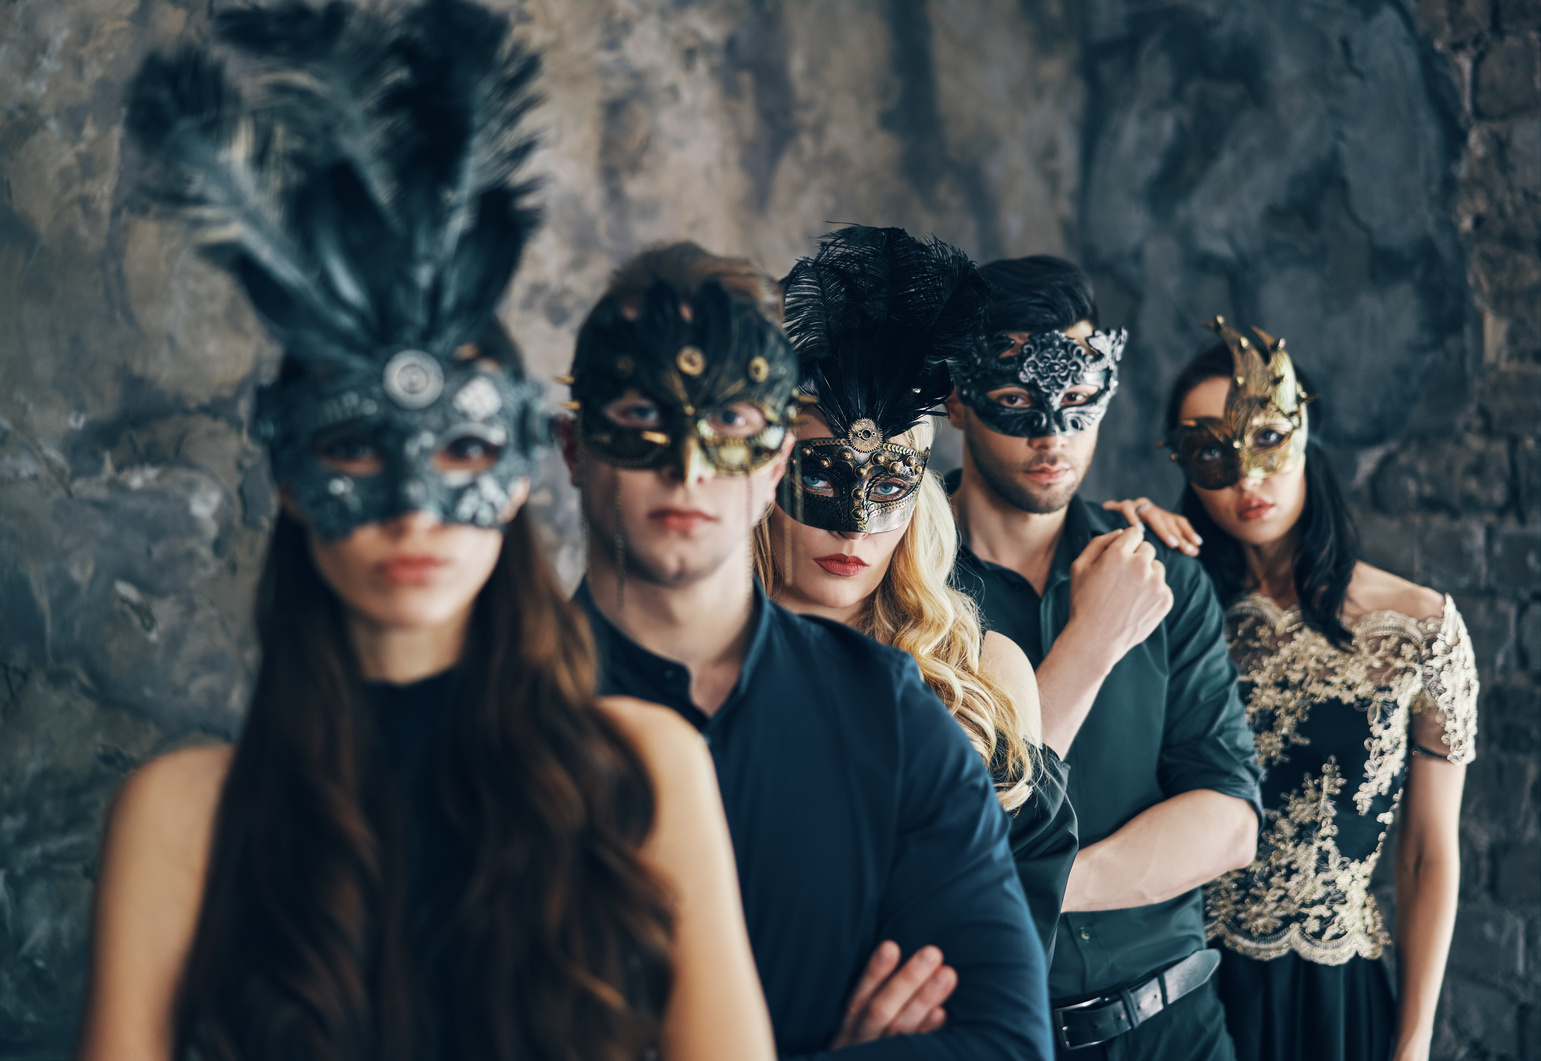 Group of People in Masquerade Carnival Mask